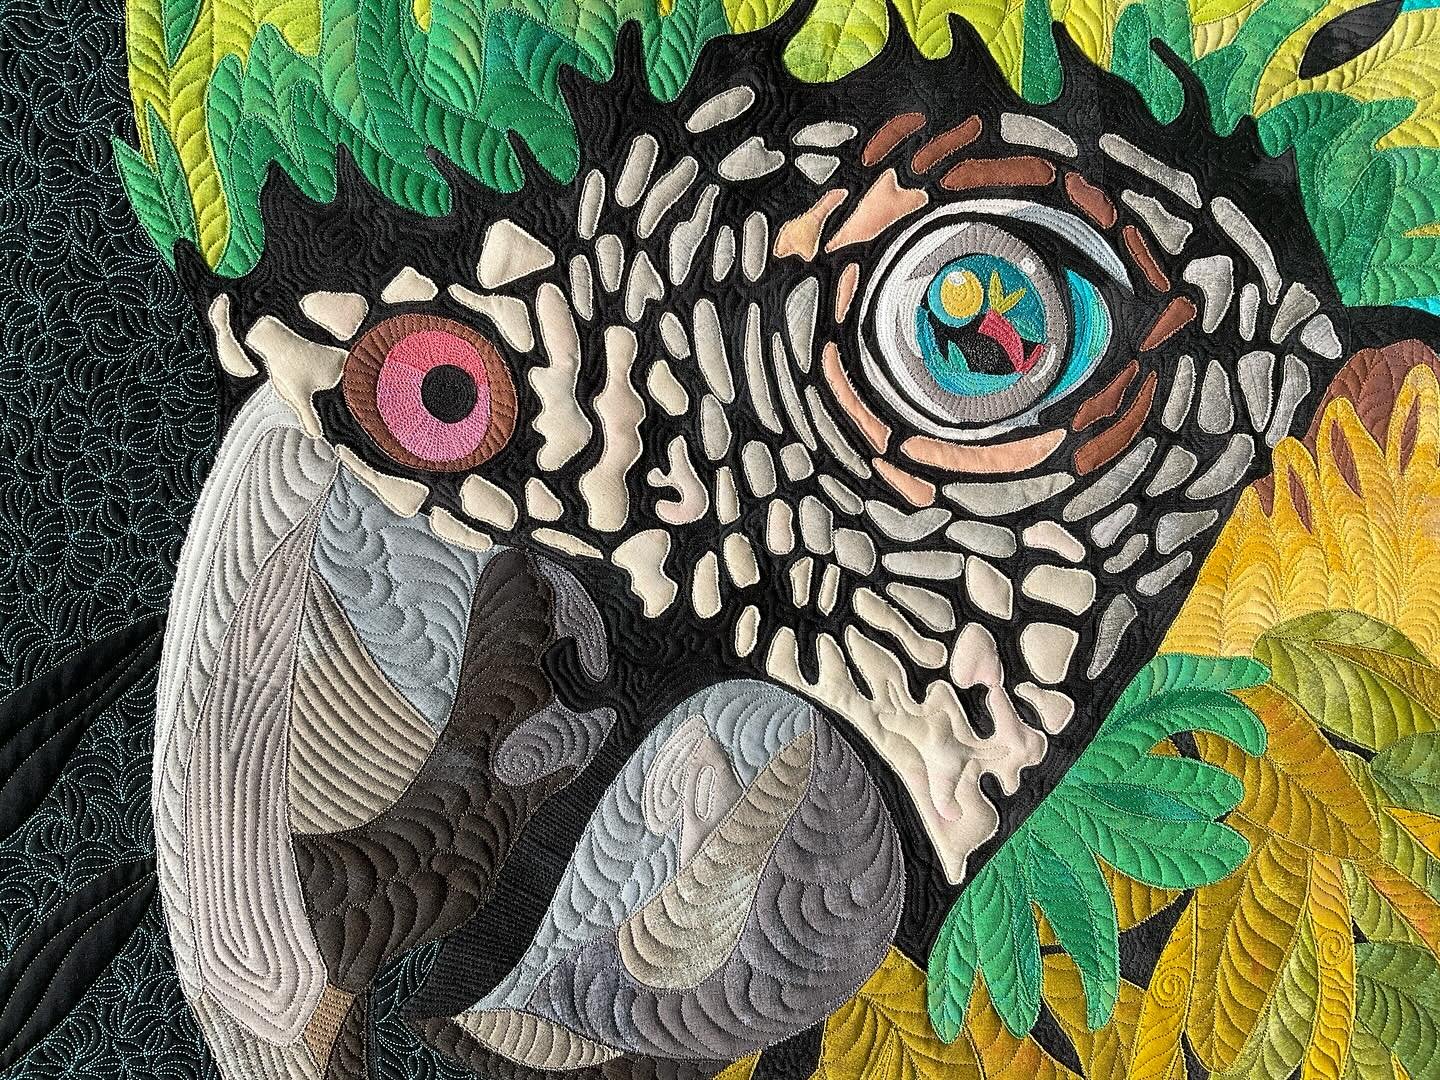 This naughty fellow took a couple of extra days to arrive at his new home. I have no idea where he was during that time, but I&rsquo;m thrilled he arrived safely and has been welcomed to his new habitat!

#justanotherdayinparadise #artquilt #artquilt